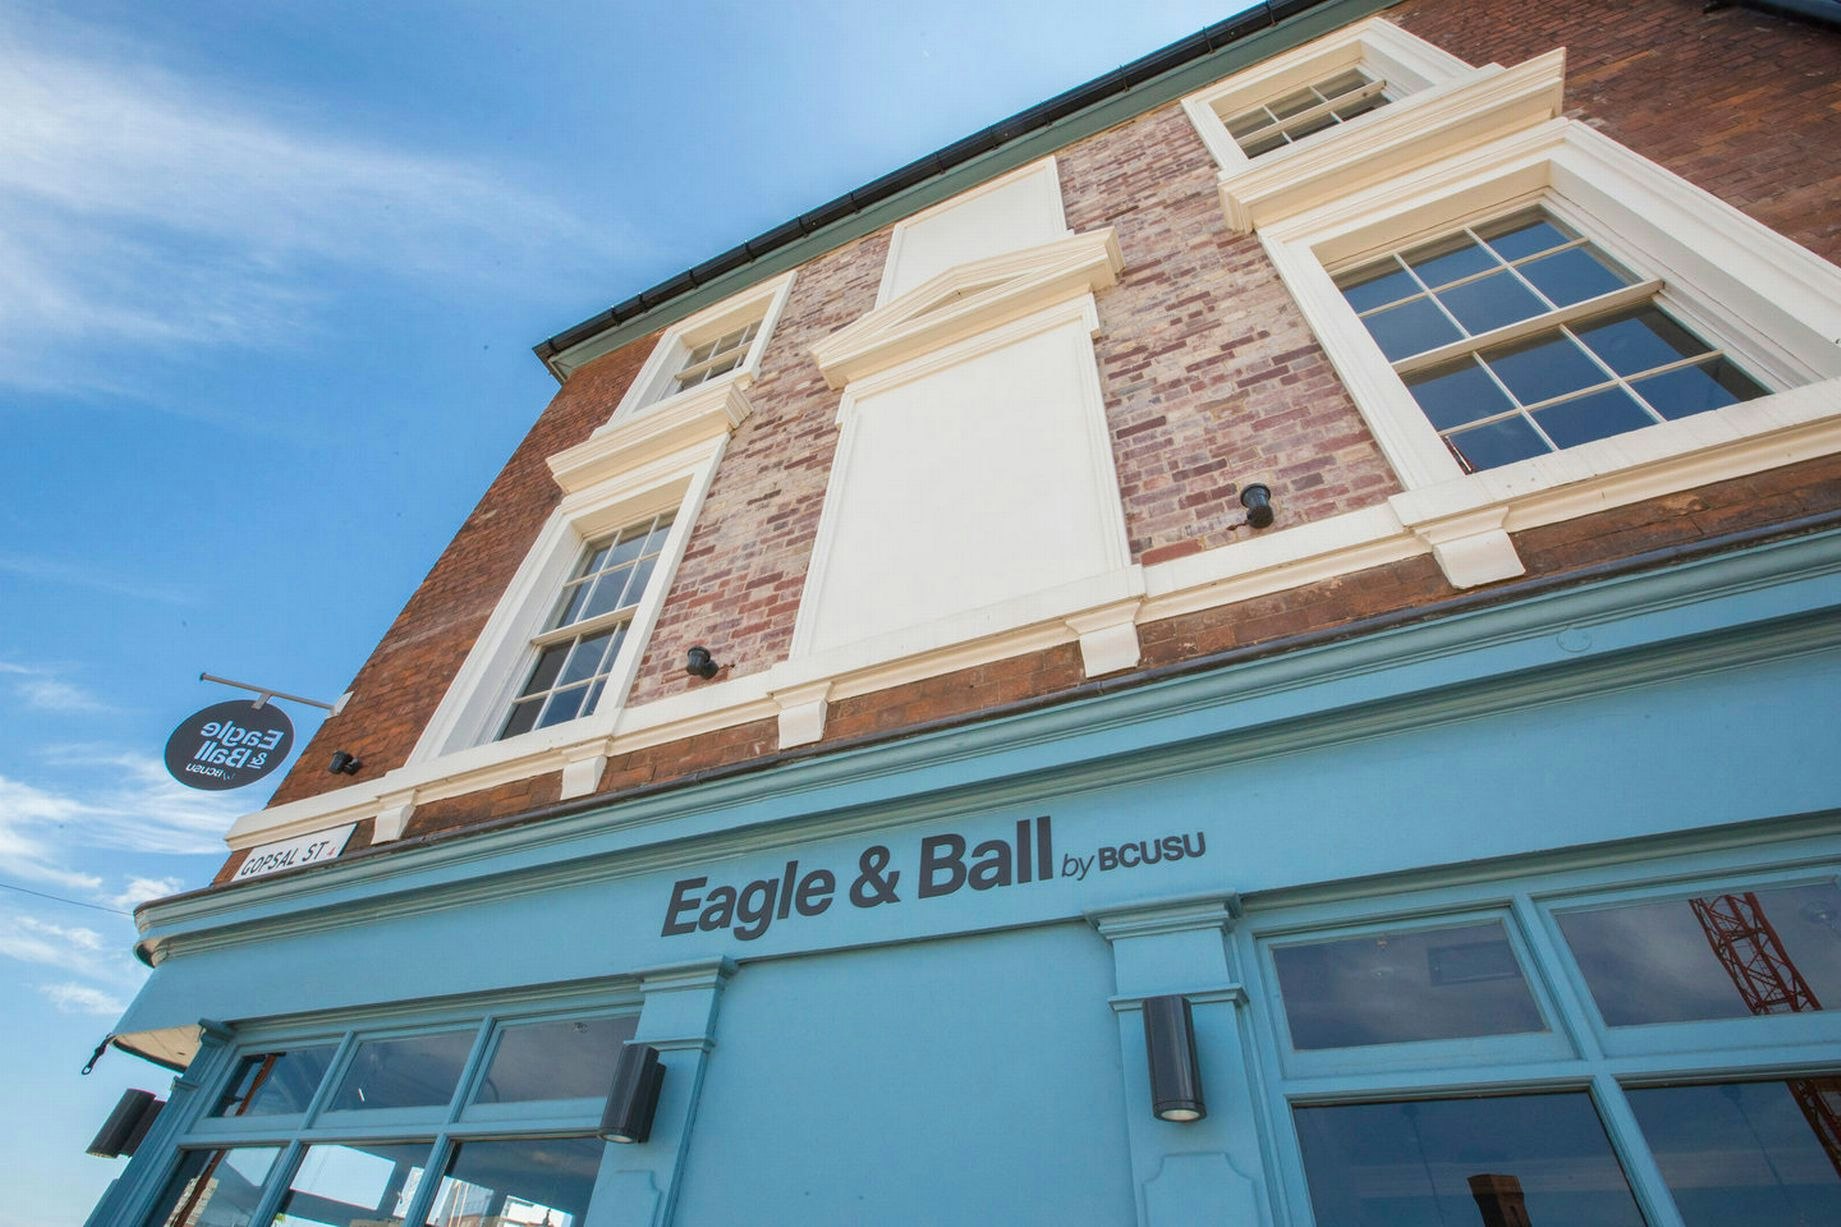 Large Party Venues in Birmingham - Eagle and Ball